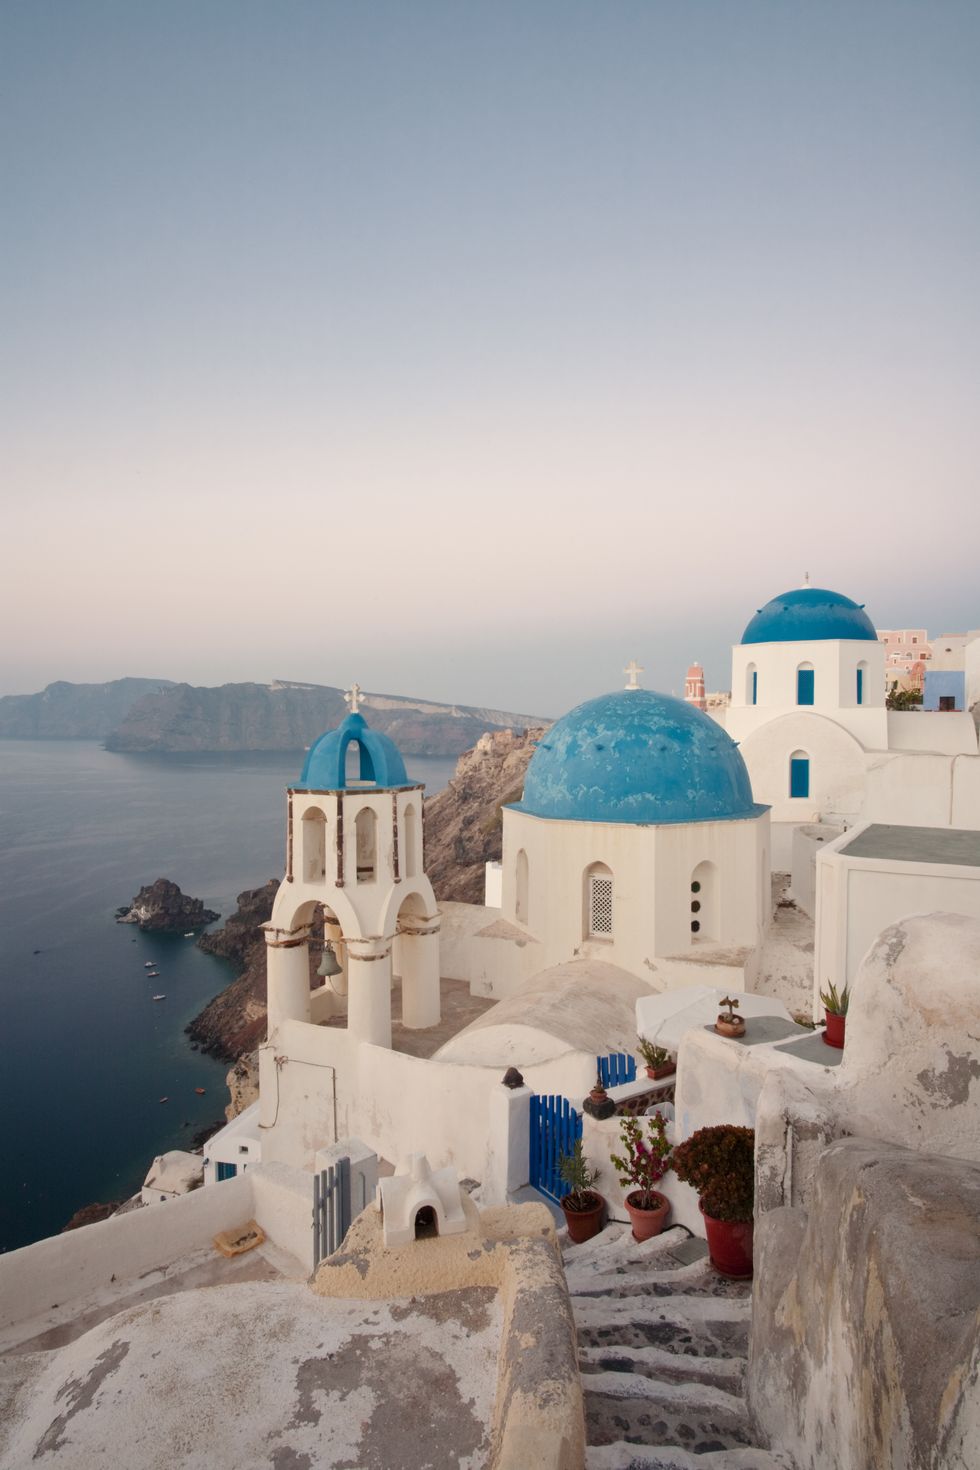 Oia, Santorini, Greece is one of the most beautiful place in the world.